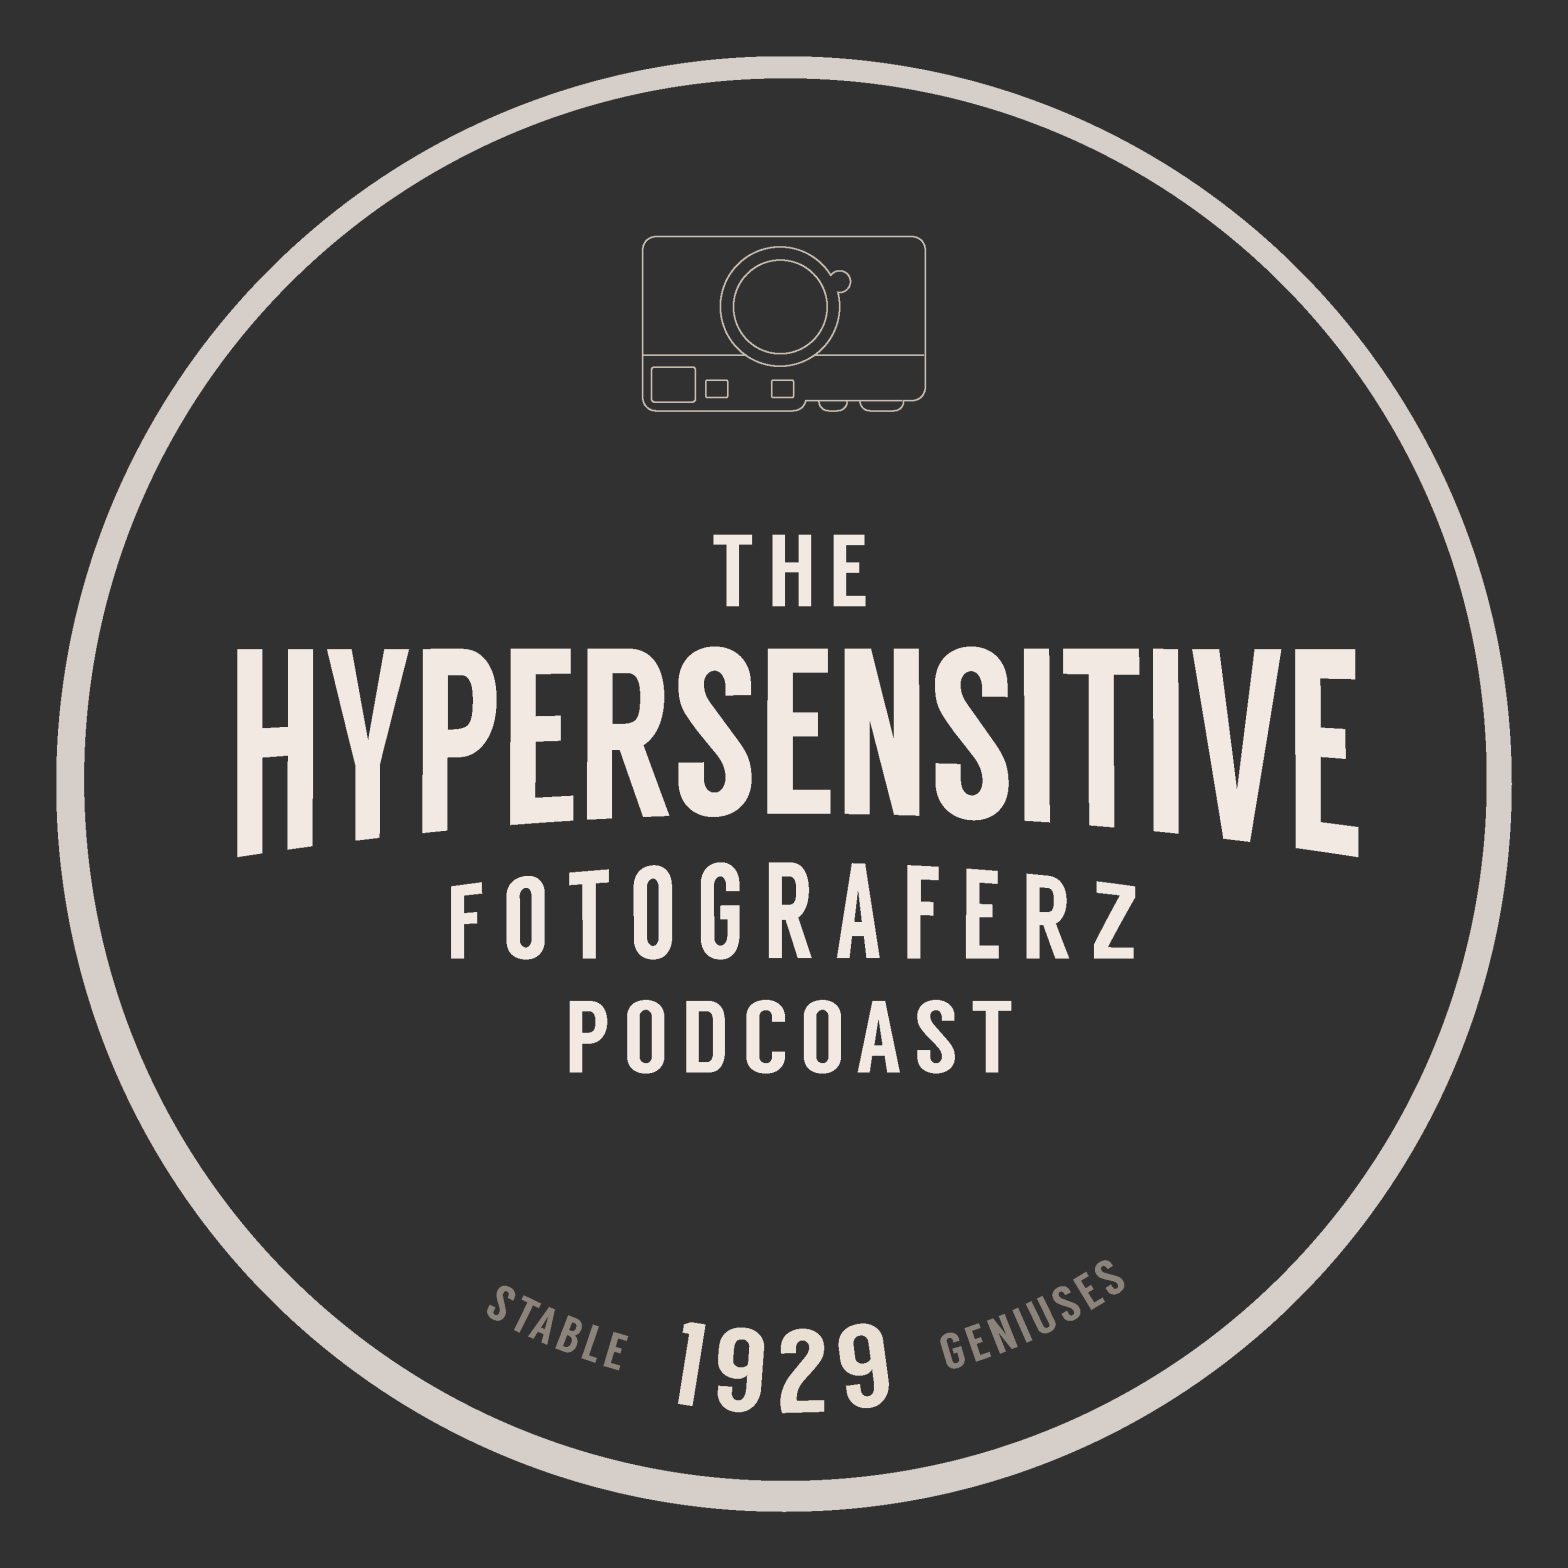 The Hypersensitive Podcast Episode 04: There’s cake in the fridge